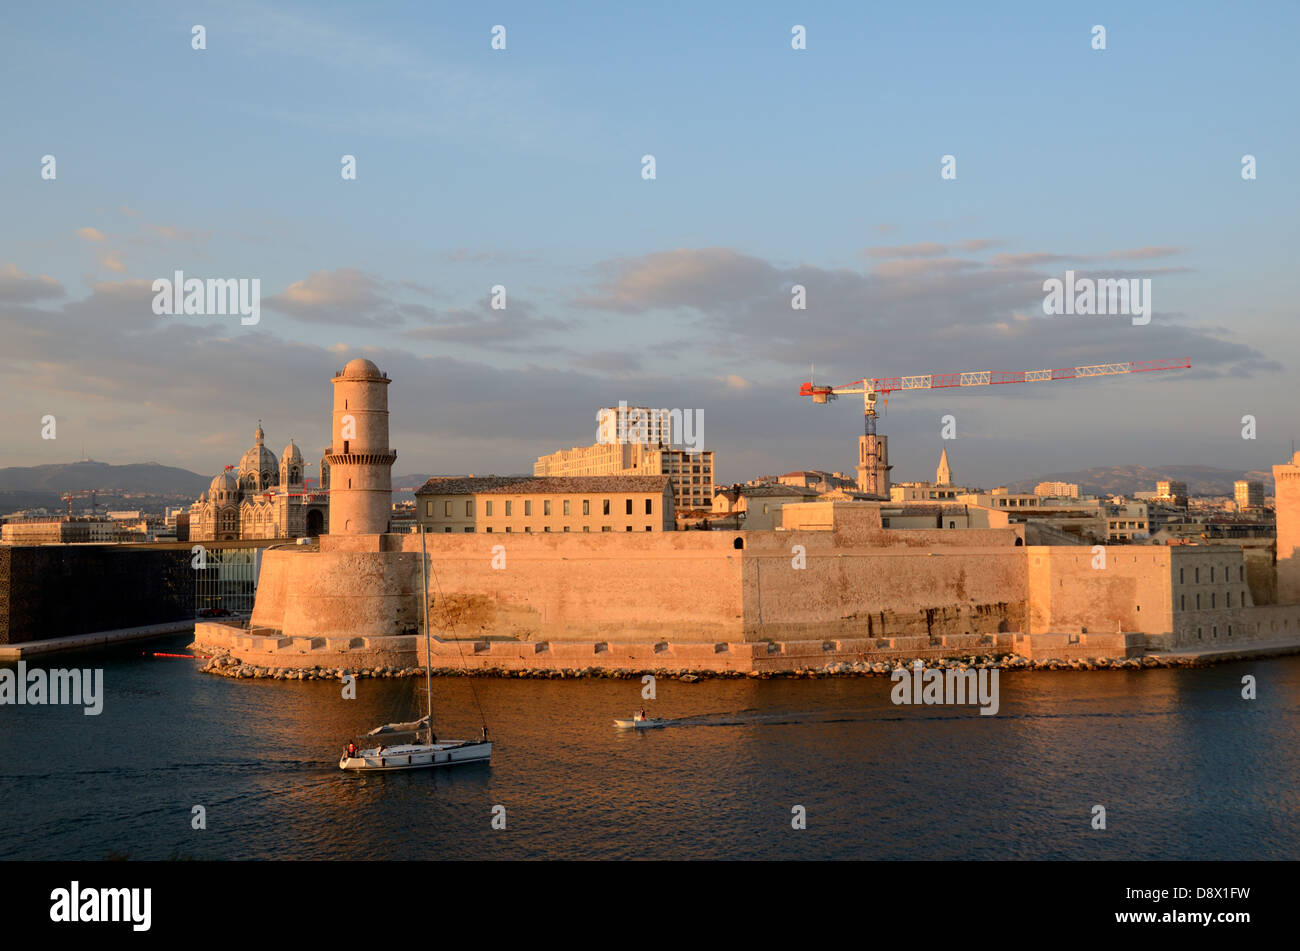 Sunset over the Fort Saint Jean at the Entrance to the Vieux Port or Old Port Marseille at Dusk Marseille Provence France Stock Photo